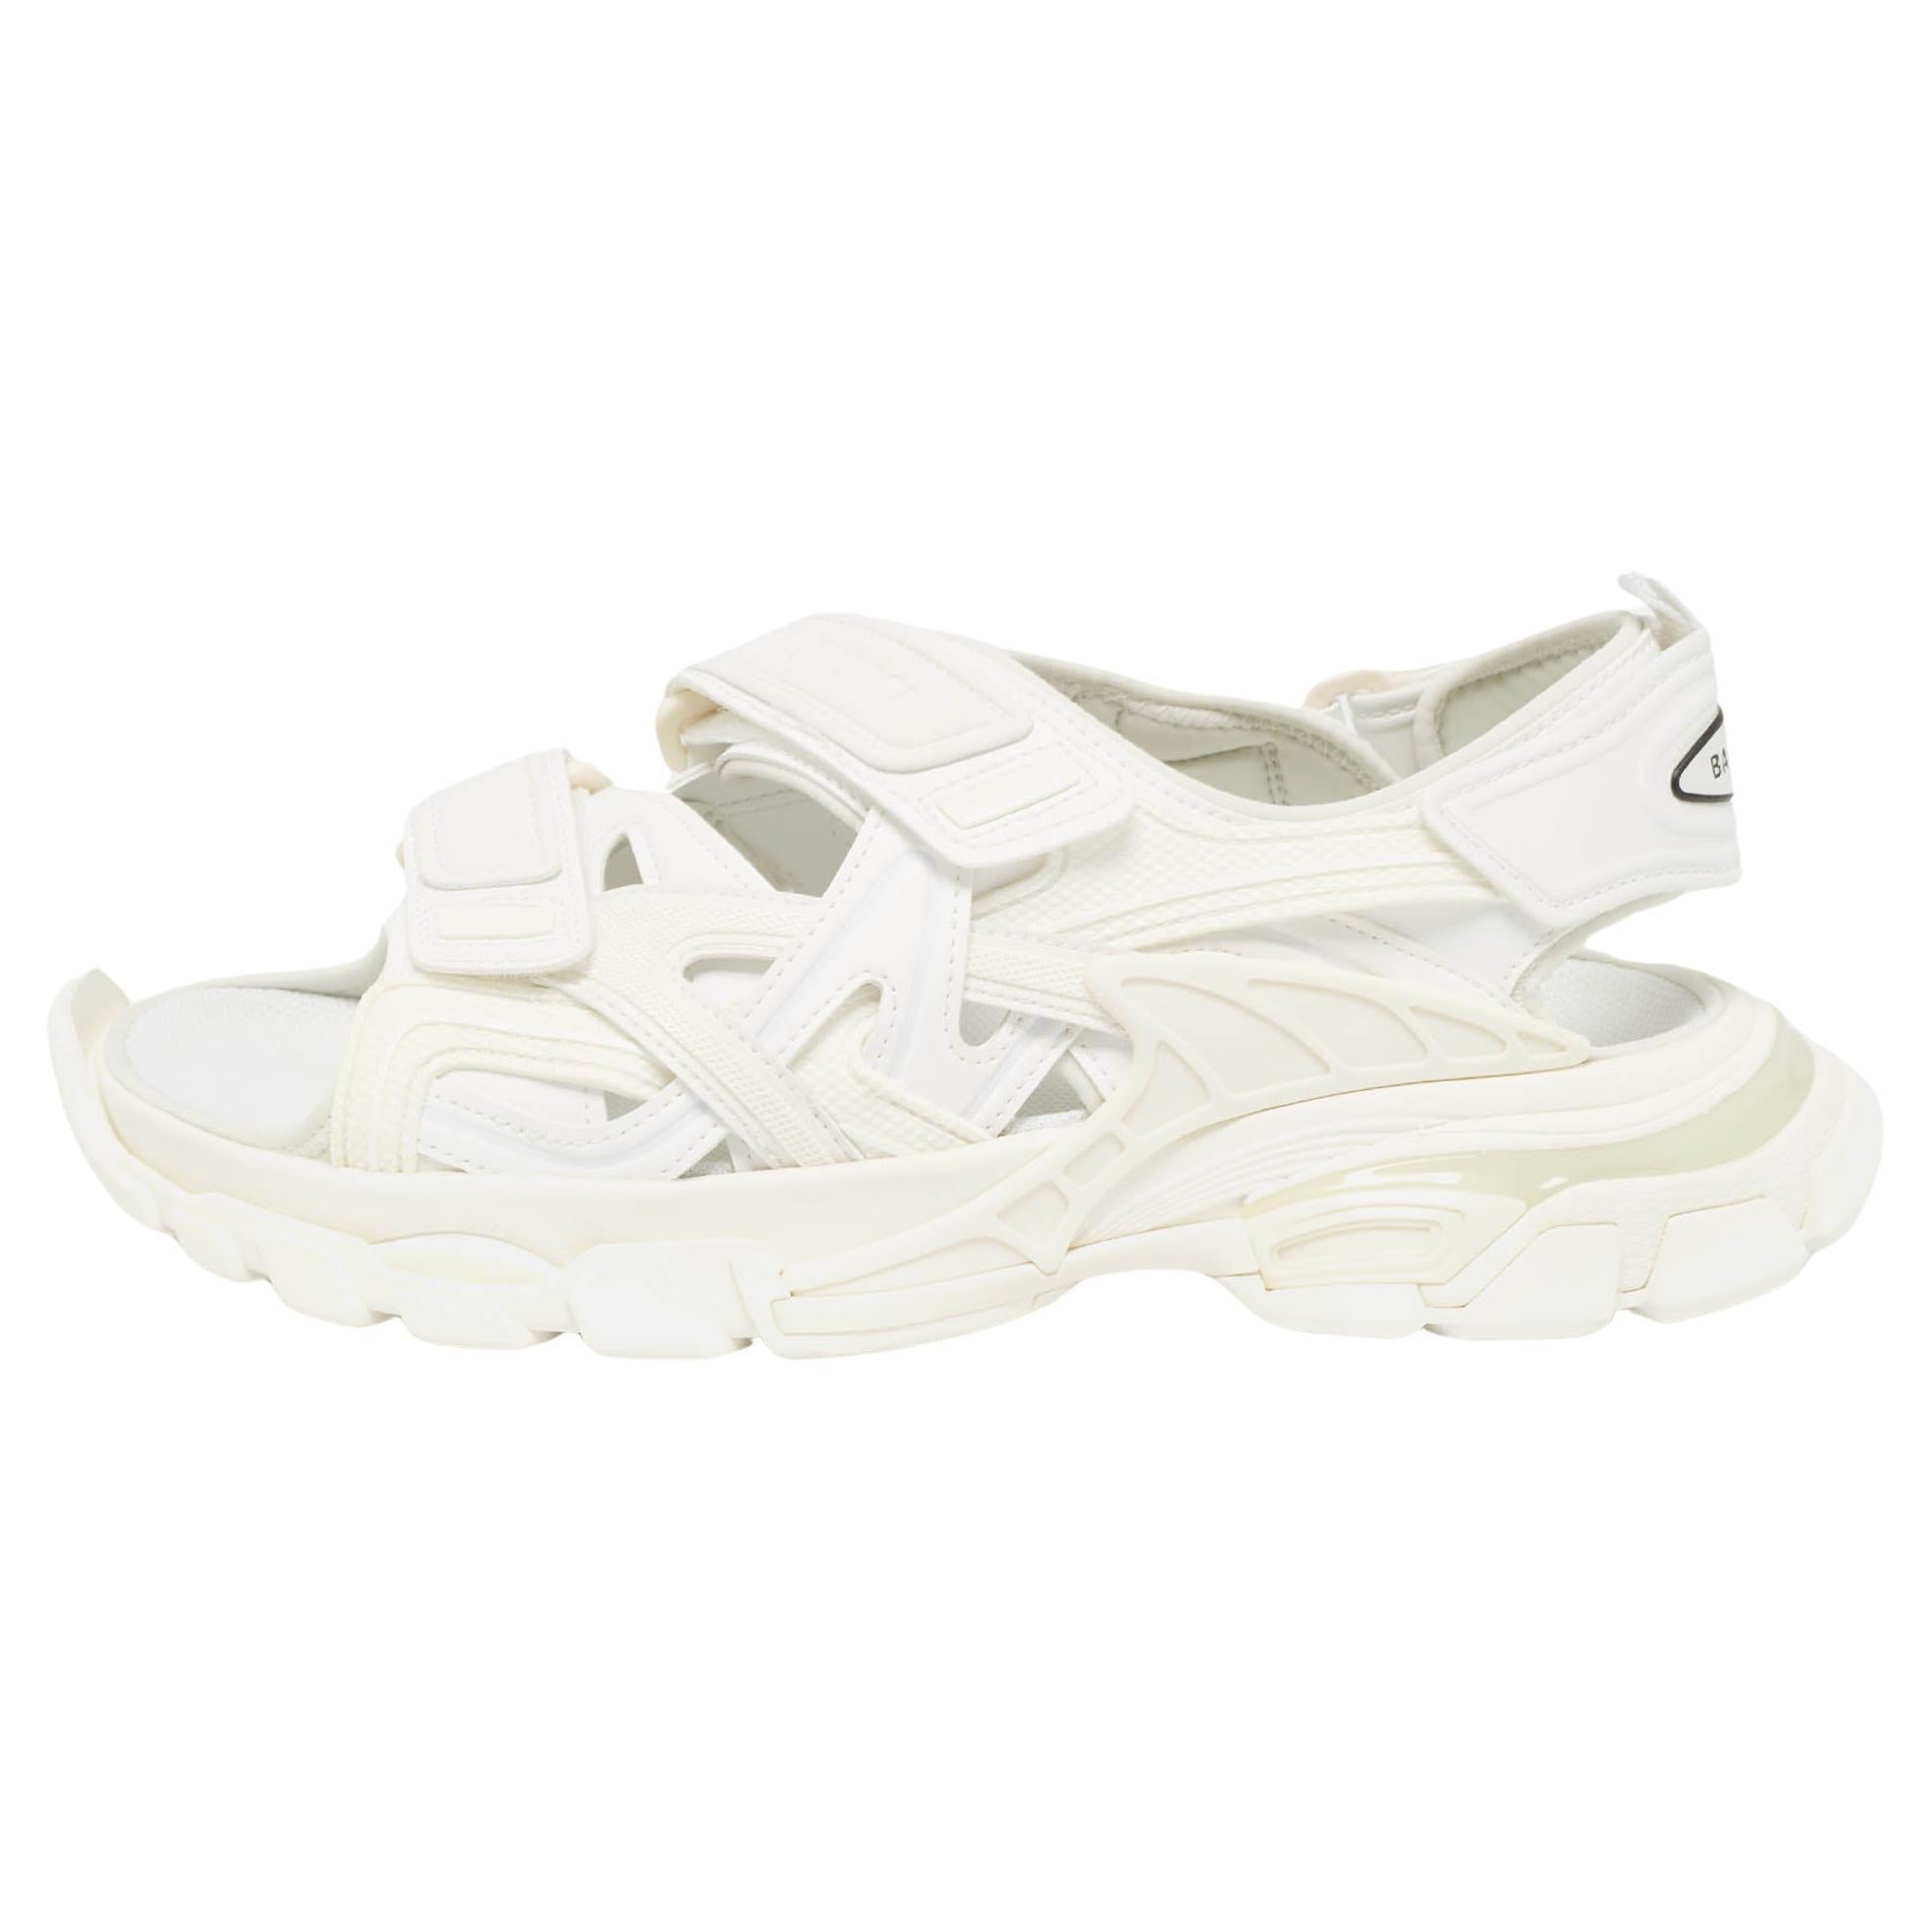 Balenciaga White Rubber and Faux Leather Track Sandals Size 42 For Sale